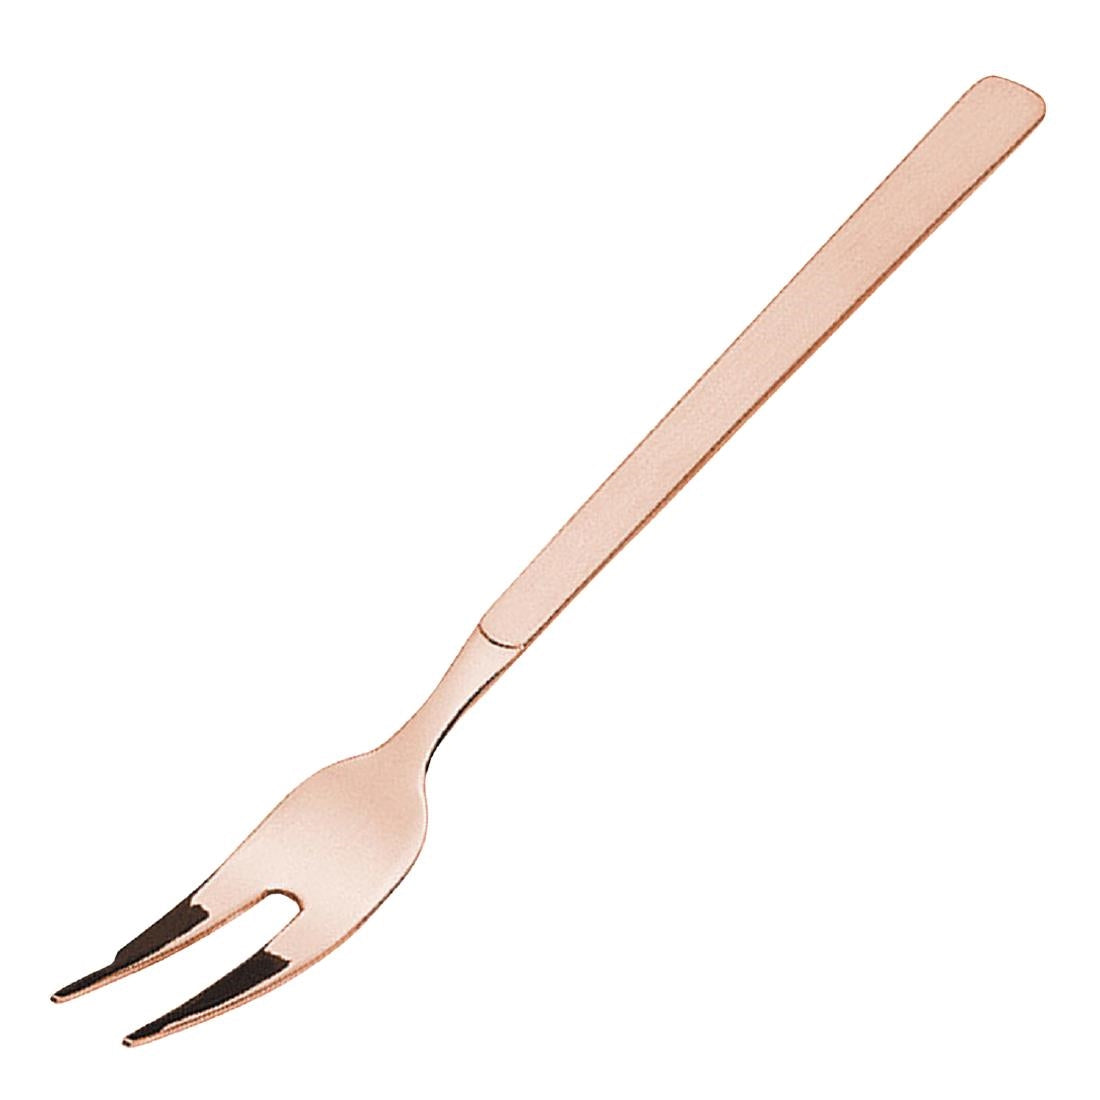 DX648 Amefa Buffet Cold Meat Fork Copper (Pack of 6)